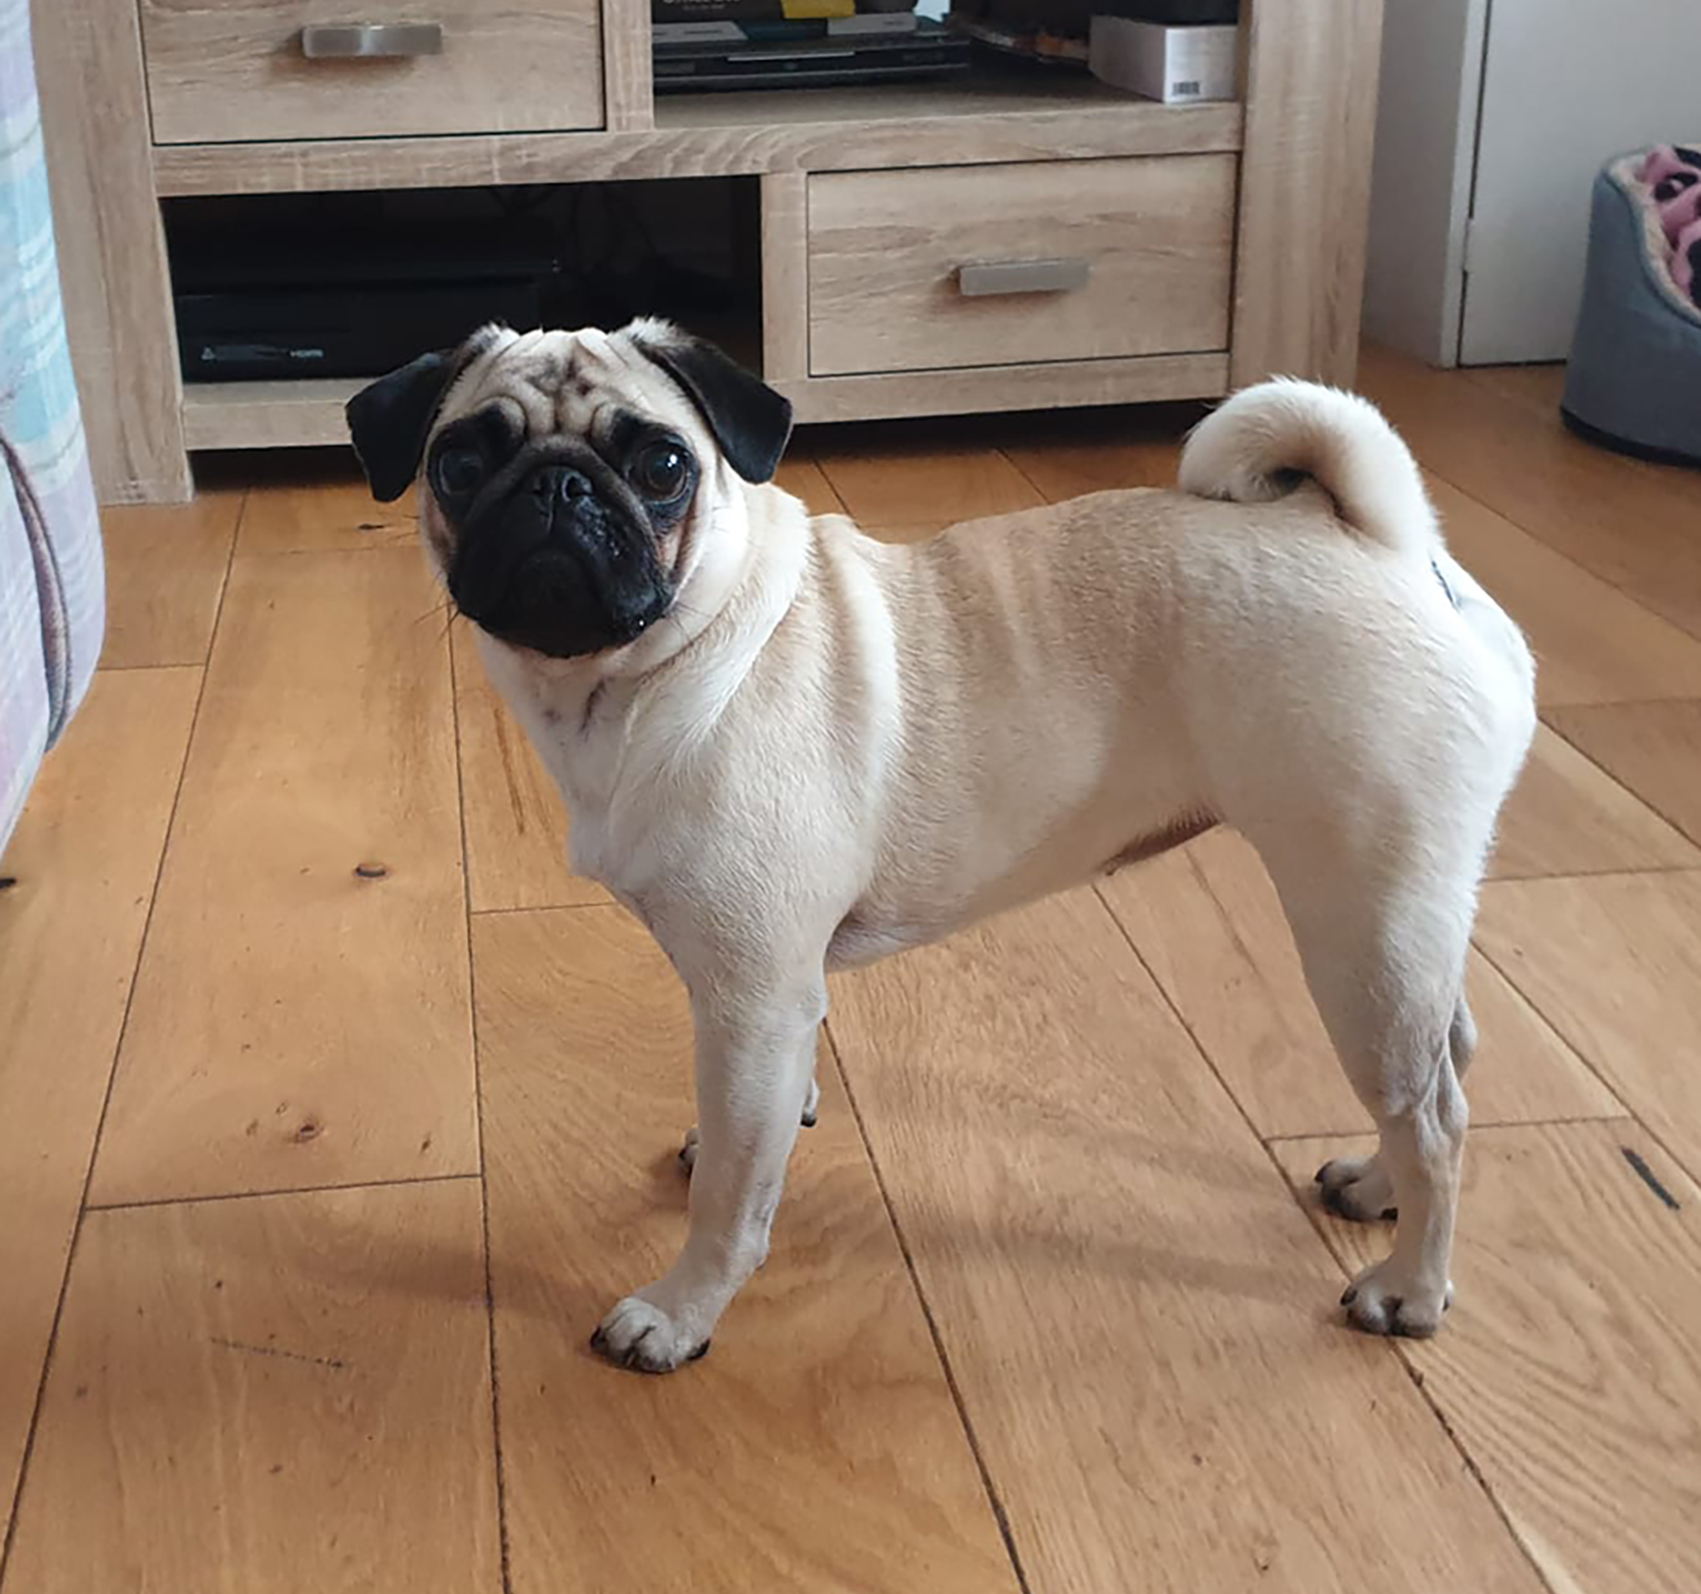 Gus goes into adoption! - image Susie on https://pugprotectiontrust.org